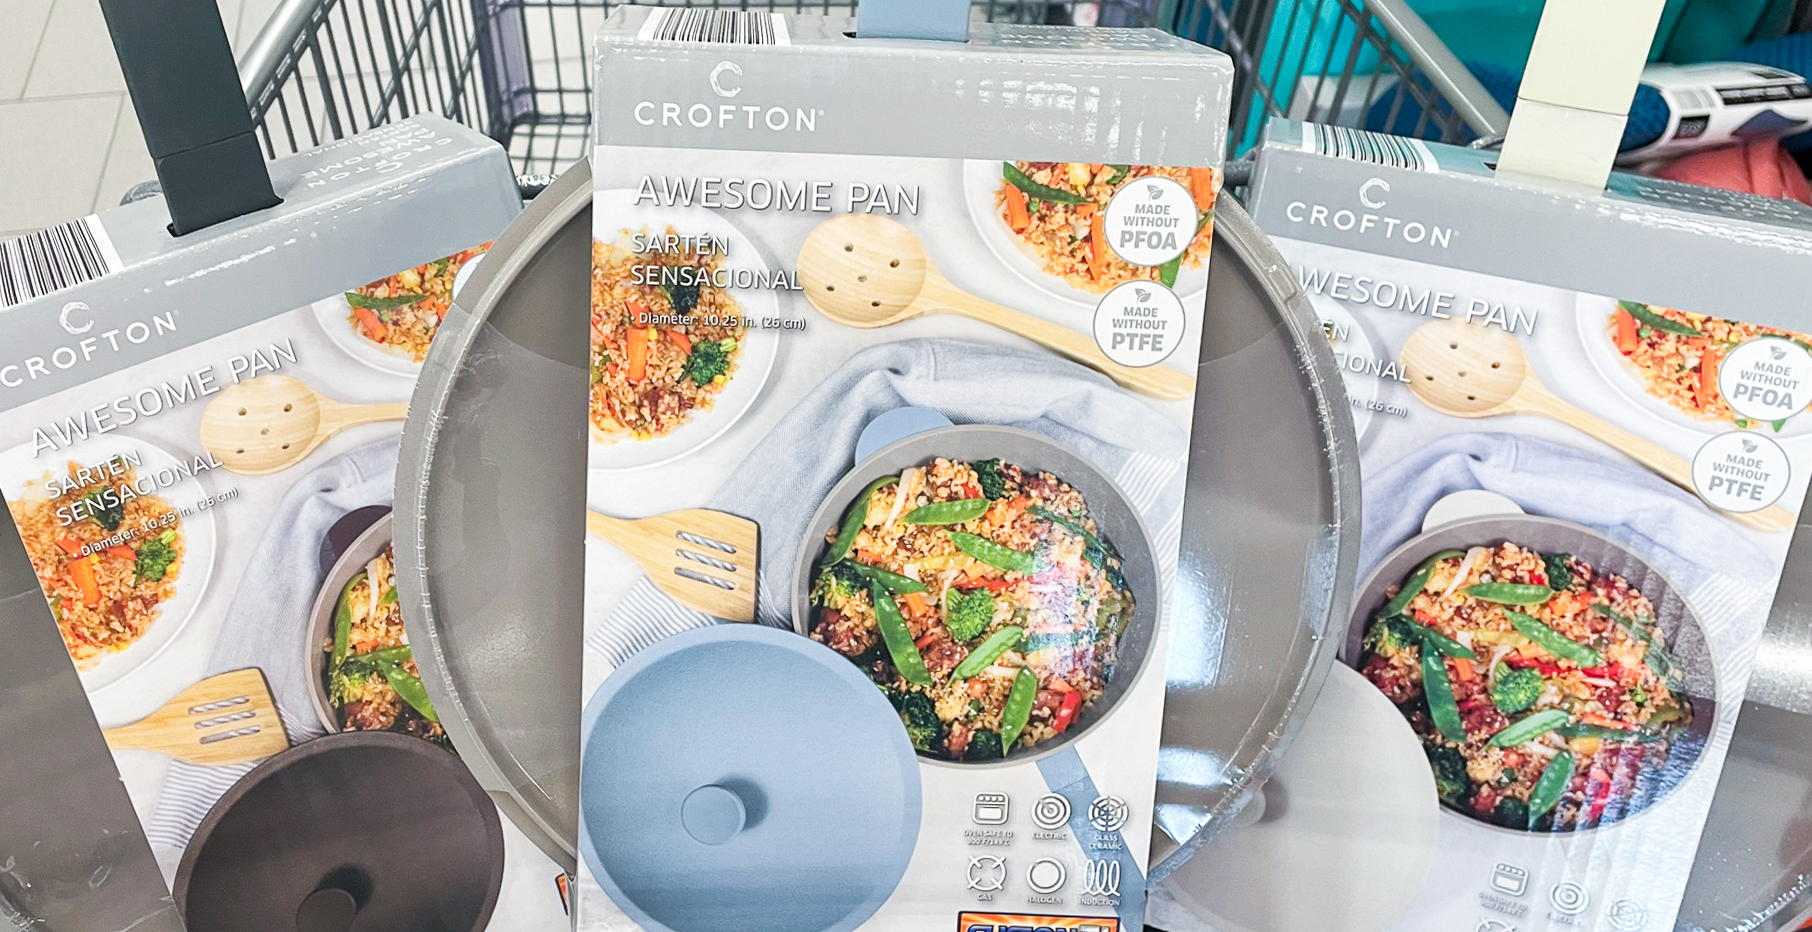 https://thekrazycouponlady.com/wp-content/uploads/2022/11/aldi-crofton-awesome-pan-featured-crop-1669829474-1669829474.jpg